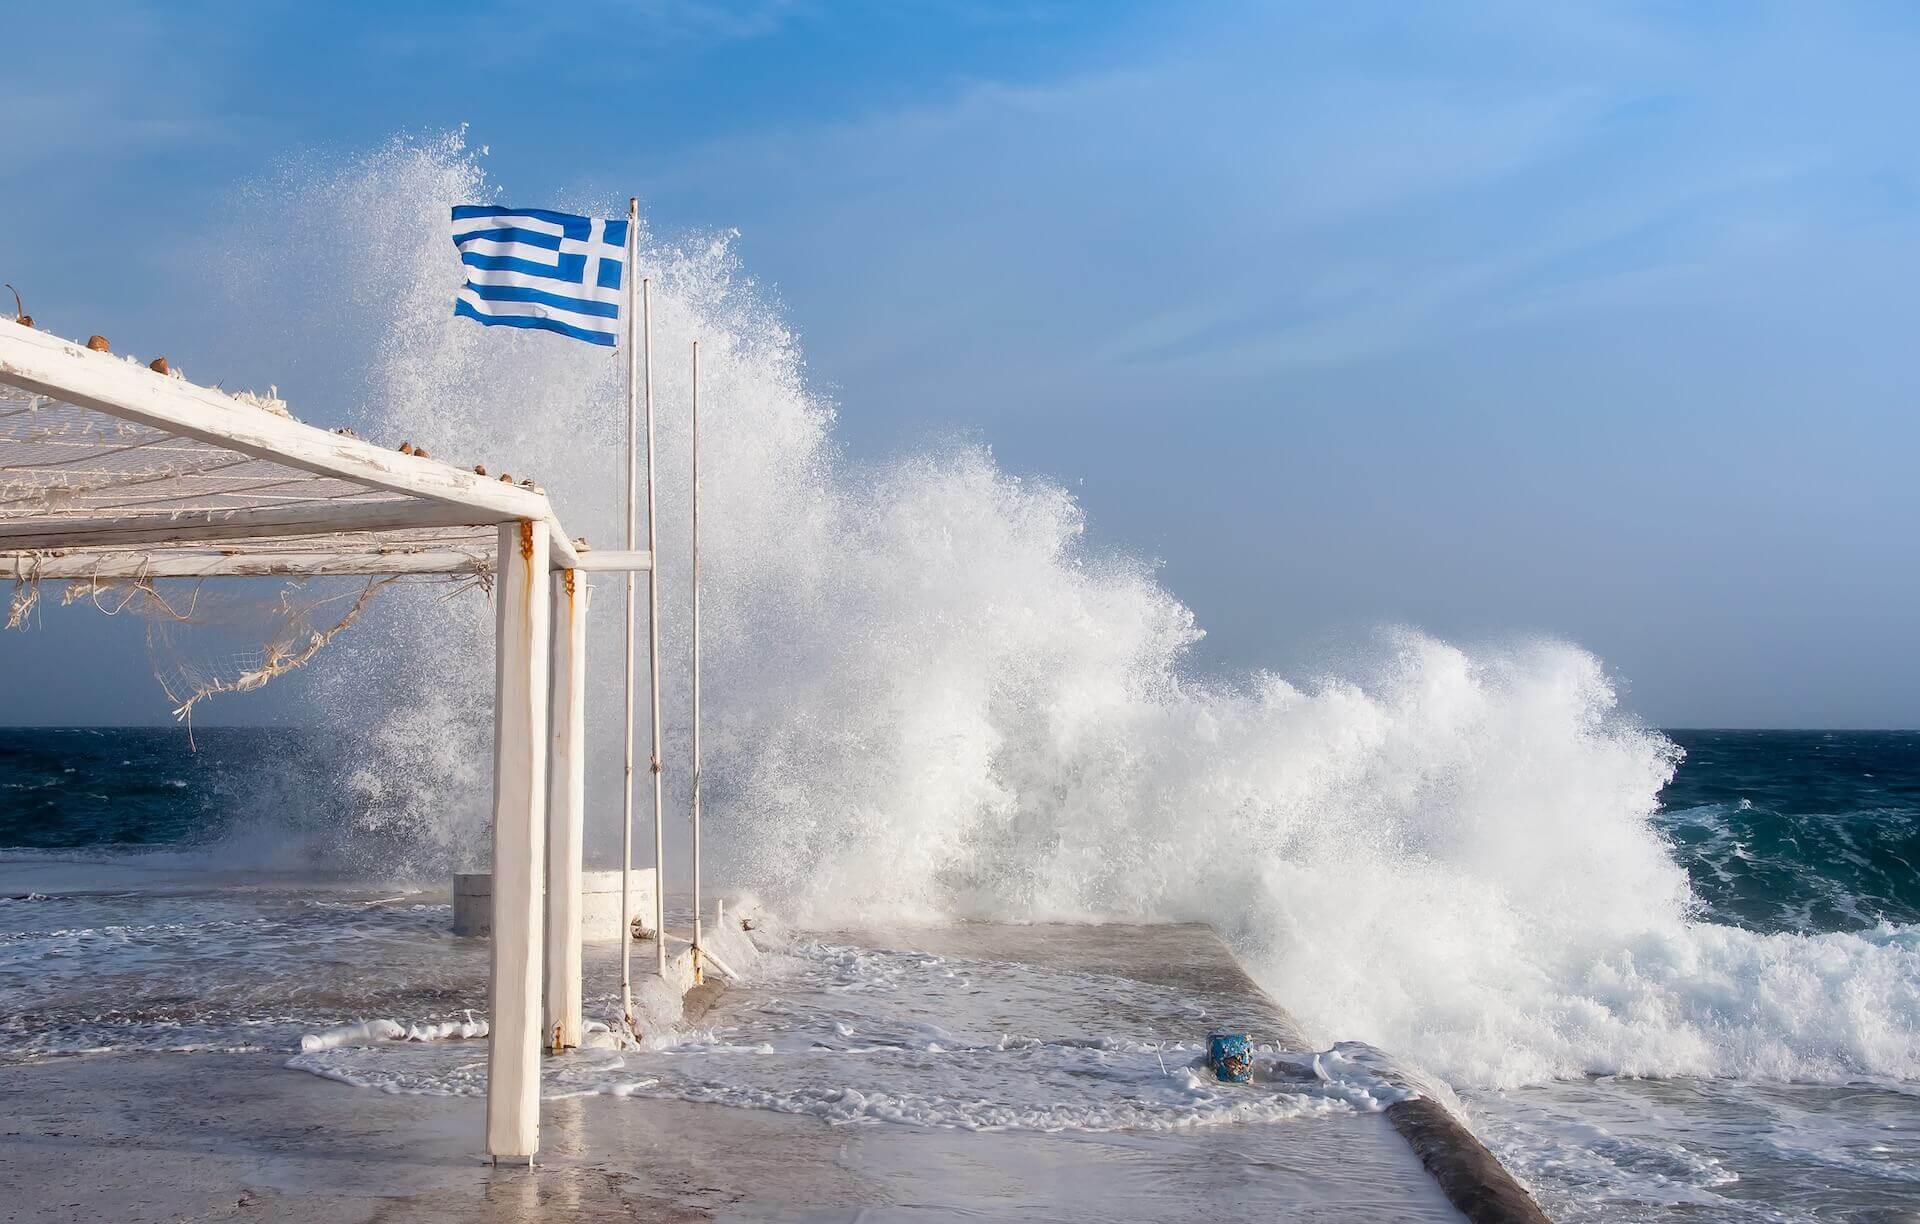 A strong wave hits the dock, where a Greek flag is perched